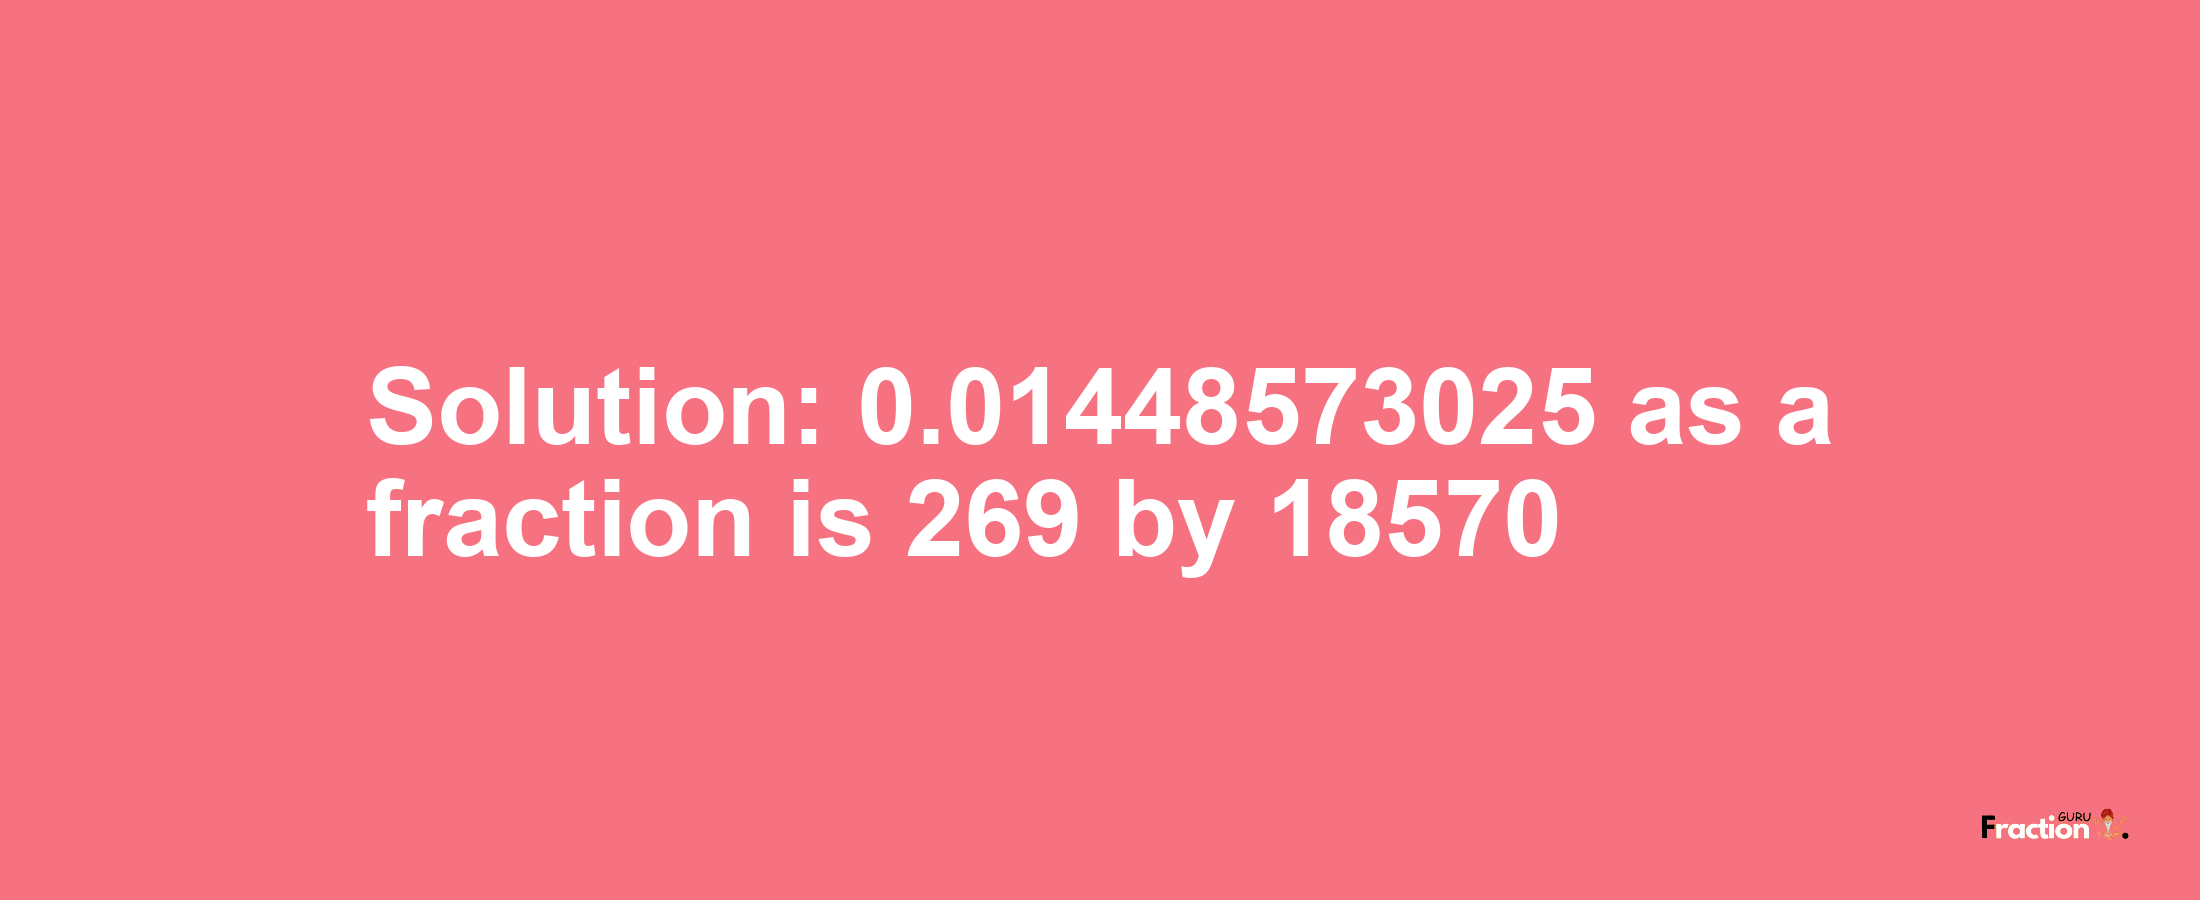 Solution:0.01448573025 as a fraction is 269/18570